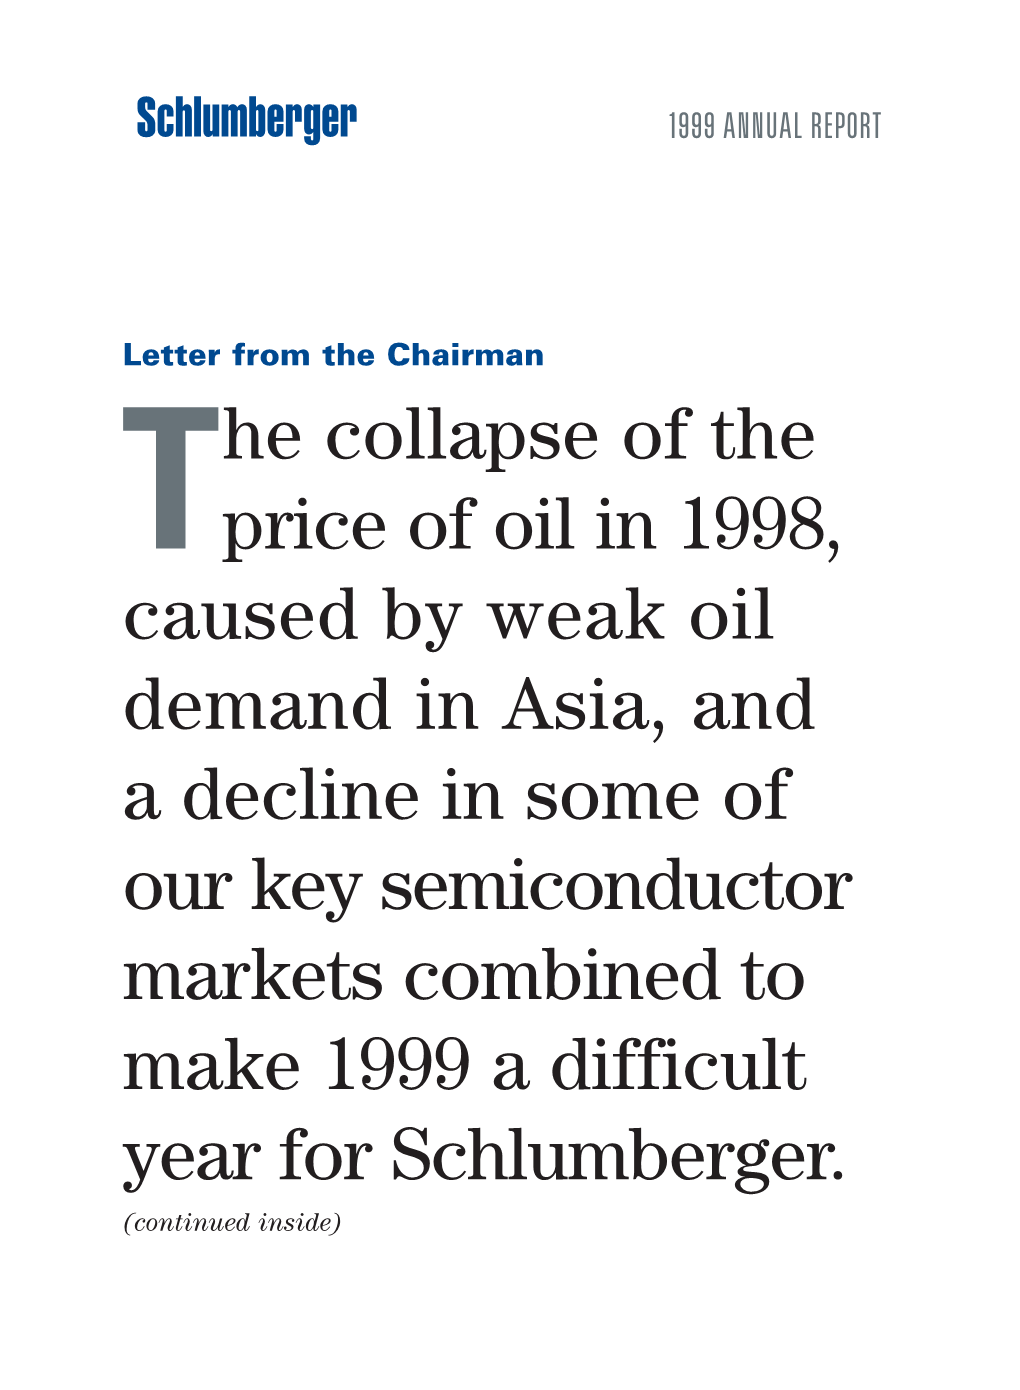 The Collapse of the Price of Oil in 1998, Caused by Weak Oil Demand in Asia, and a Decline in Some of Our Key Semiconductor Mark